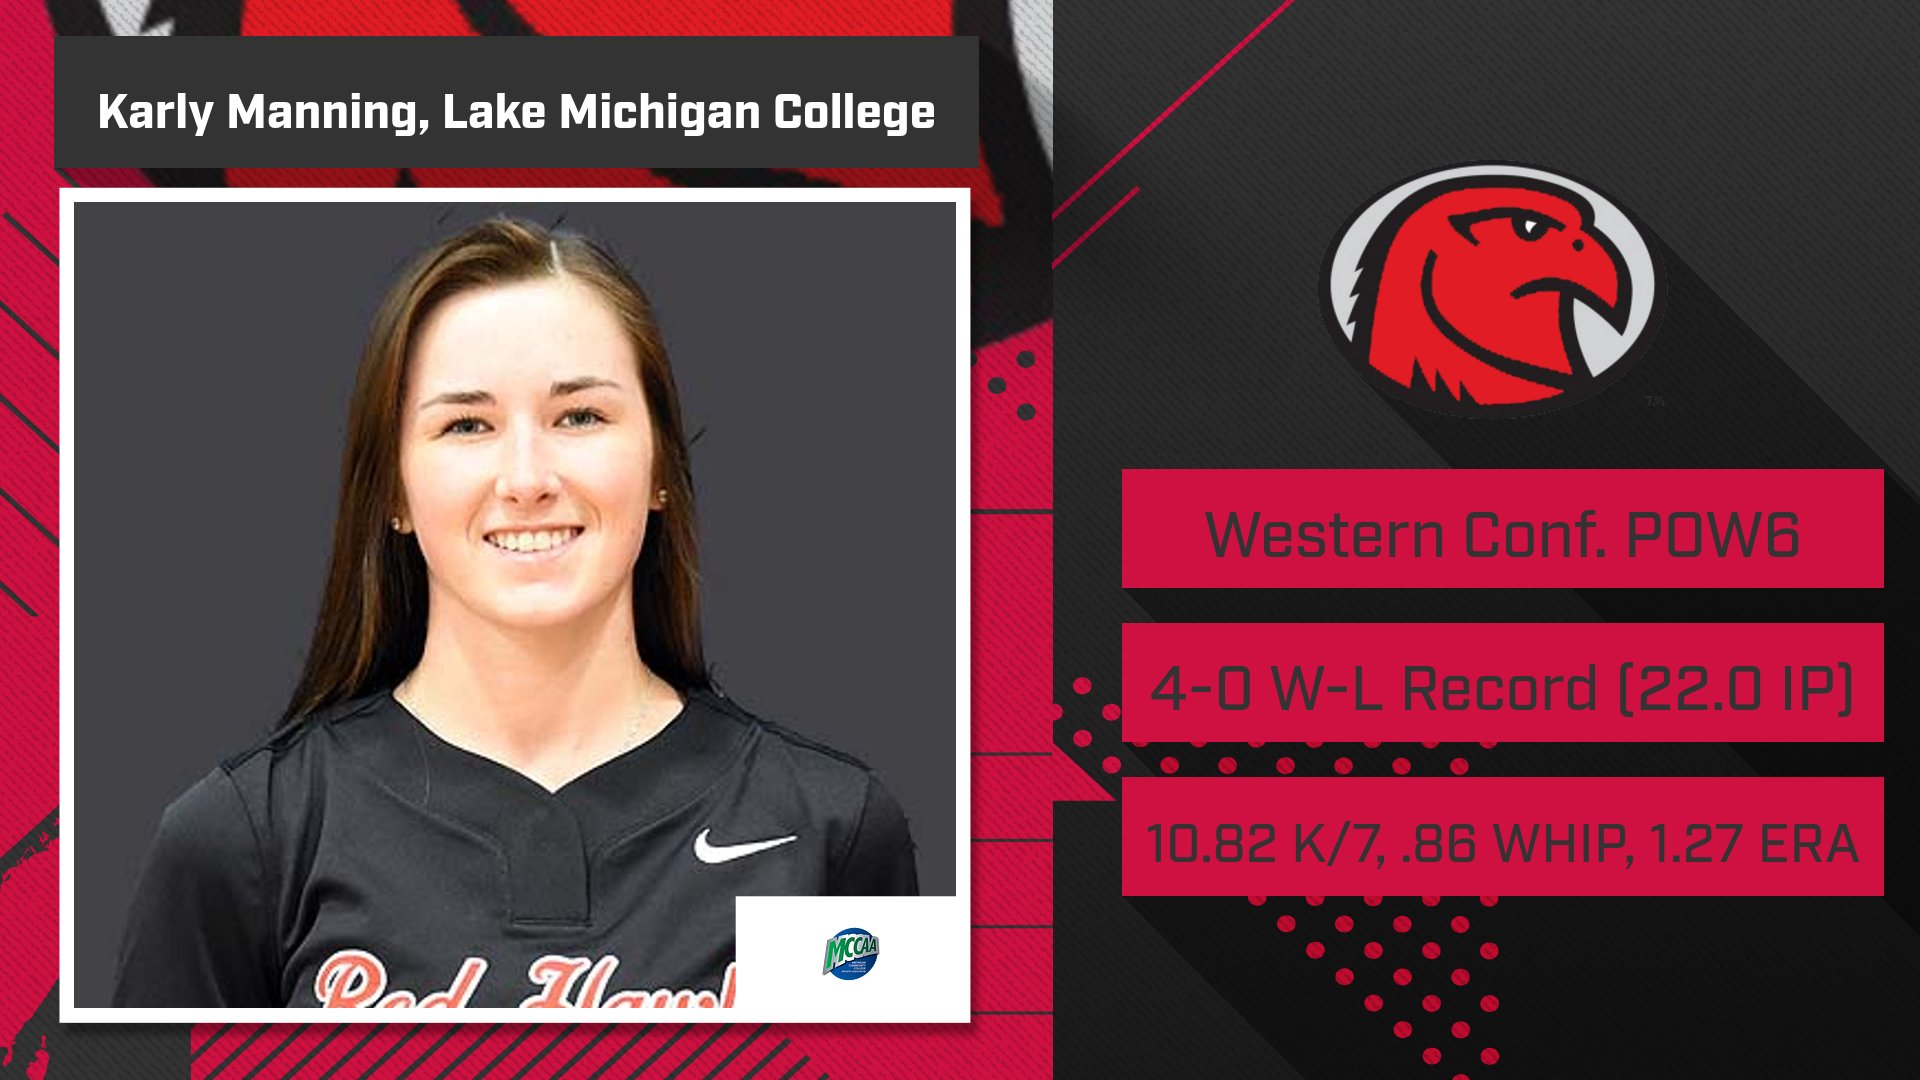 Lake Michigan's Manning Five-Peats MCCAA Western Conference Softball Pitcher of the Week6 Honors